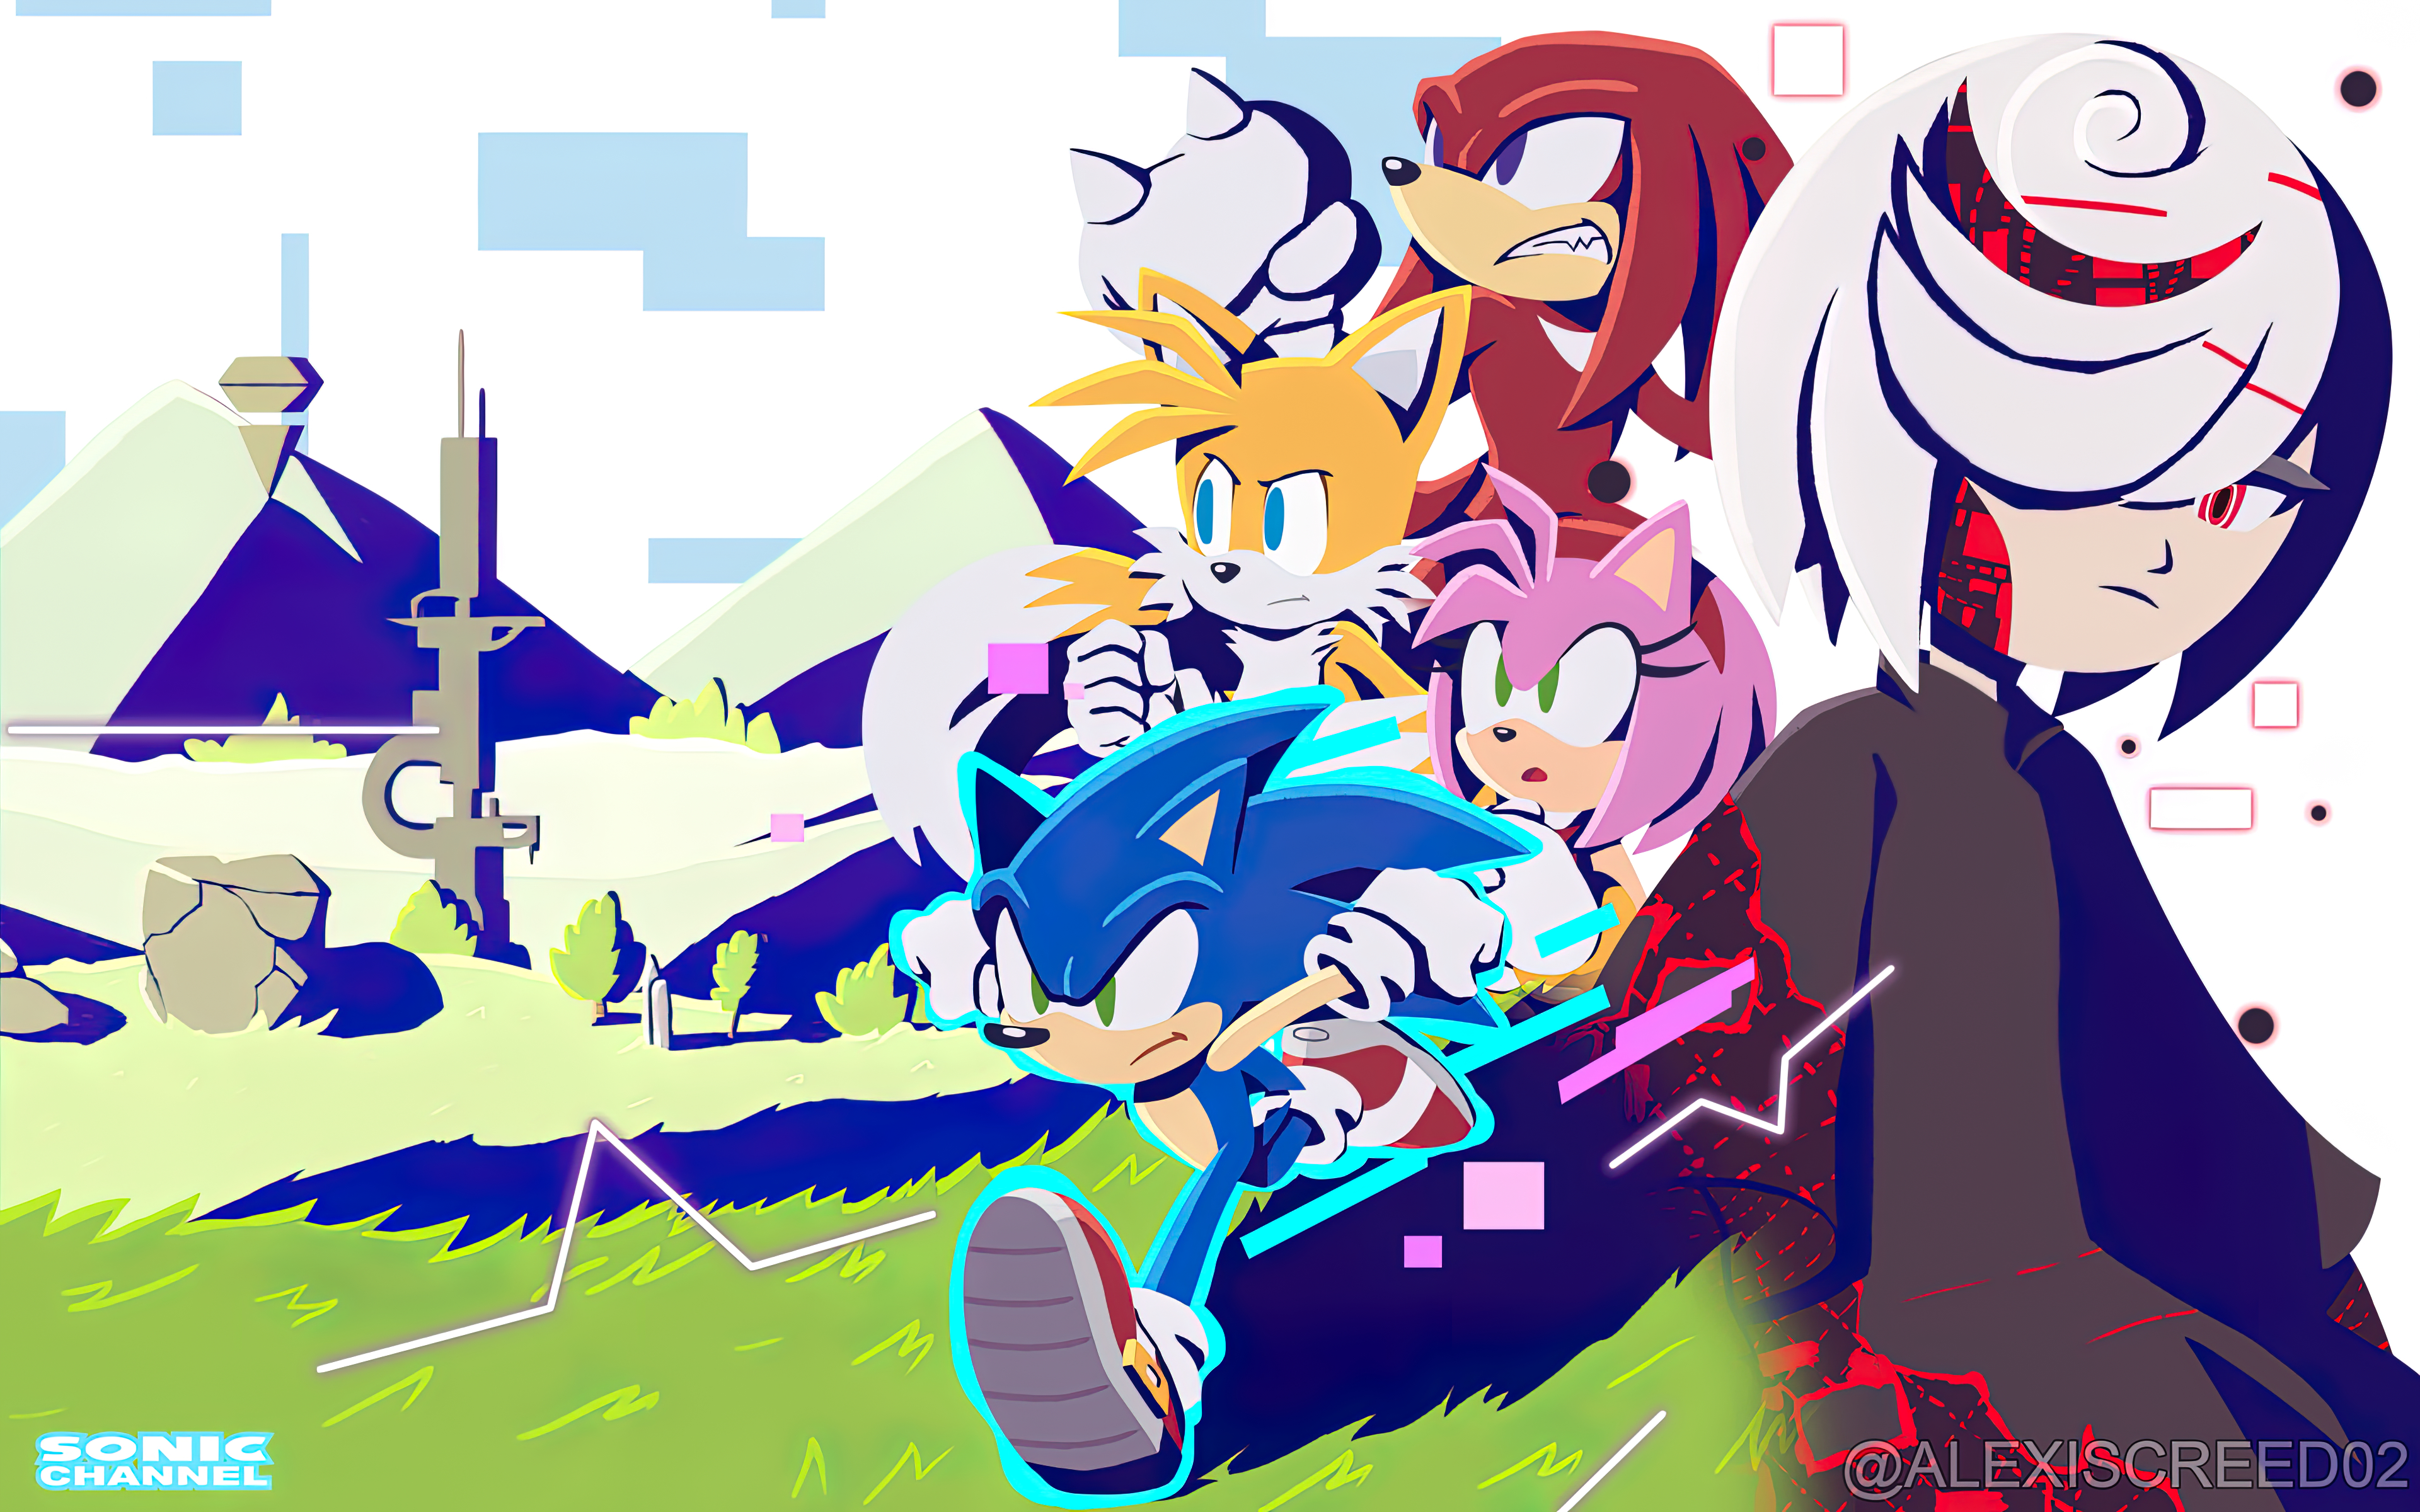 General 3840x2400 Sonic Sega PC gaming Sonic Frontiers video game art Sonic the Hedgehog sage Knuckles Tails (character) Amy Rose Phantom tower Yui Karasuno video game characters video games artwork